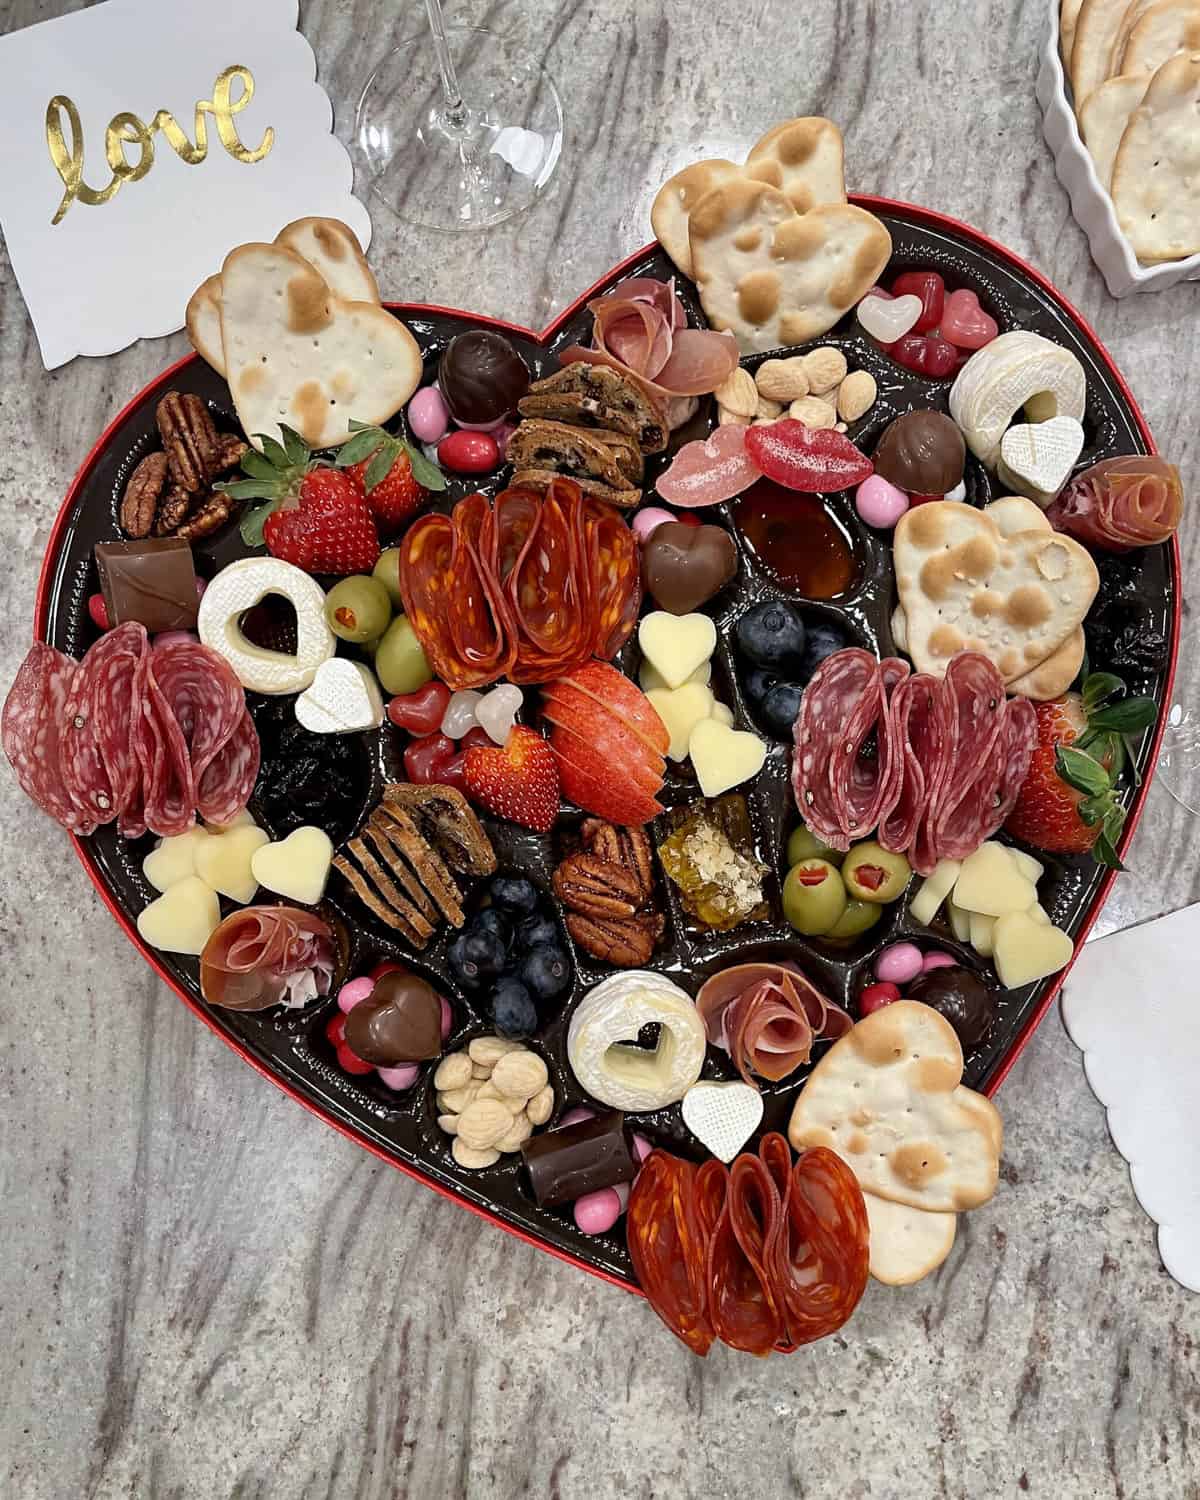 Cheese and Charcuterie Heart Box by The BakerMama